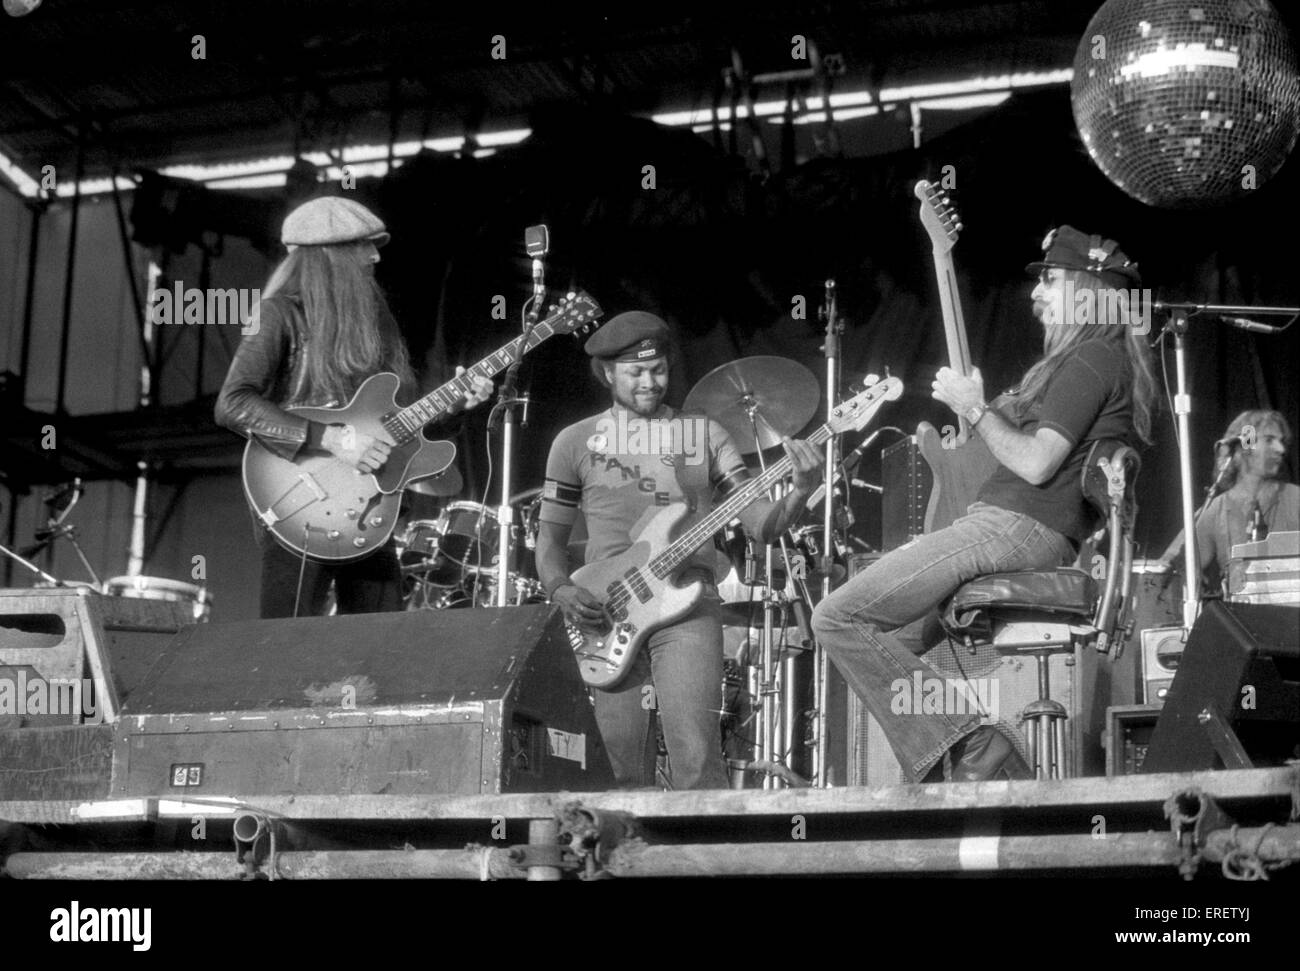 American rock band The Doobie Brothers performing at the Reading rock festival, England, in August 1977. Stock Photo